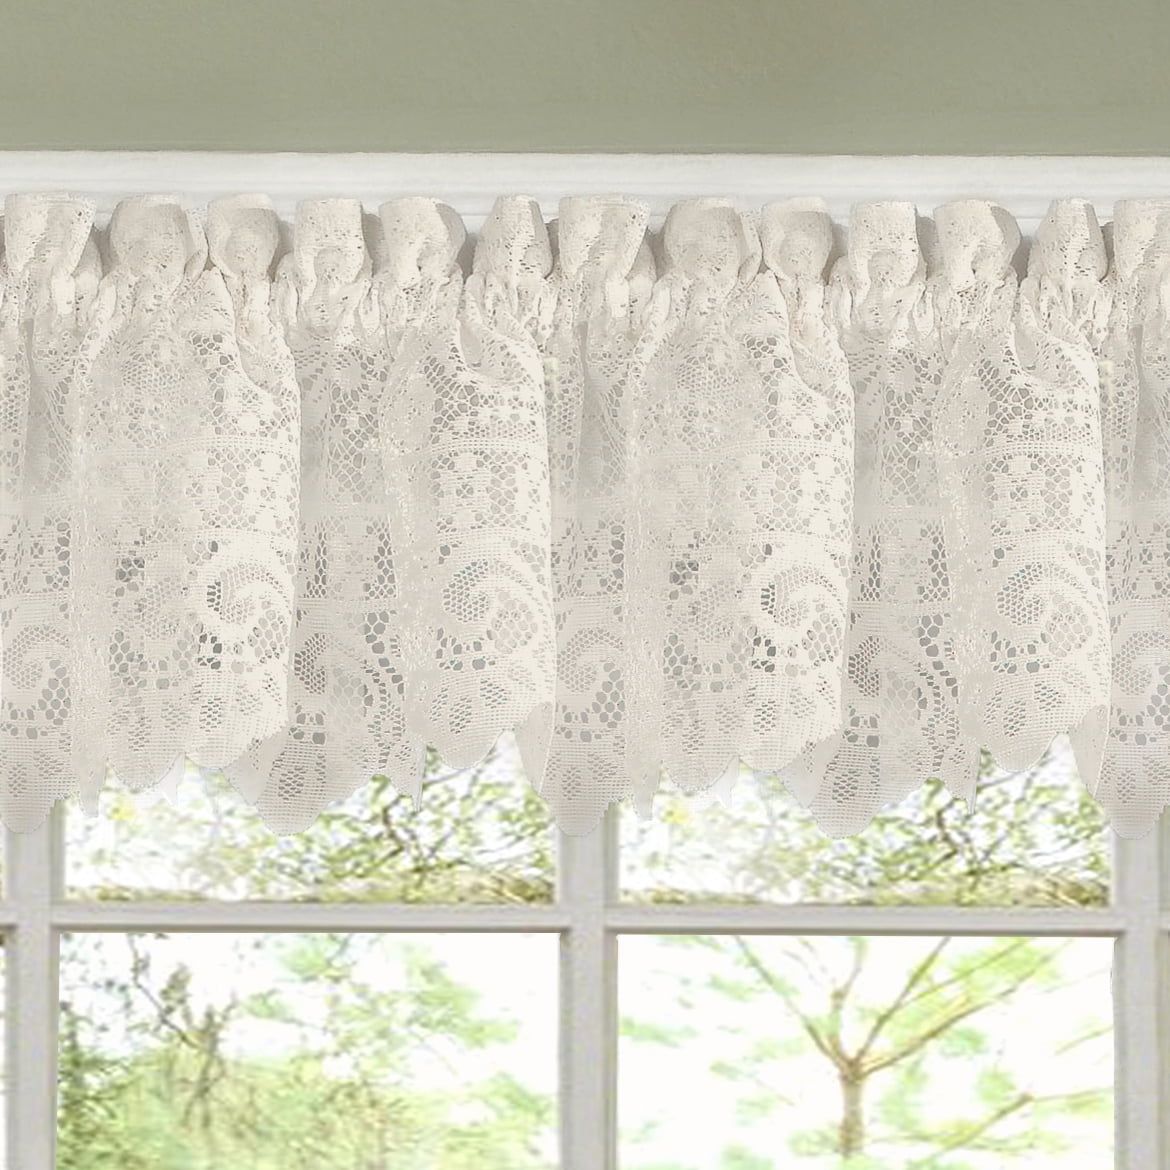 2 X Creamy White Kitchen Curtains/ Door Curtains with Lace 